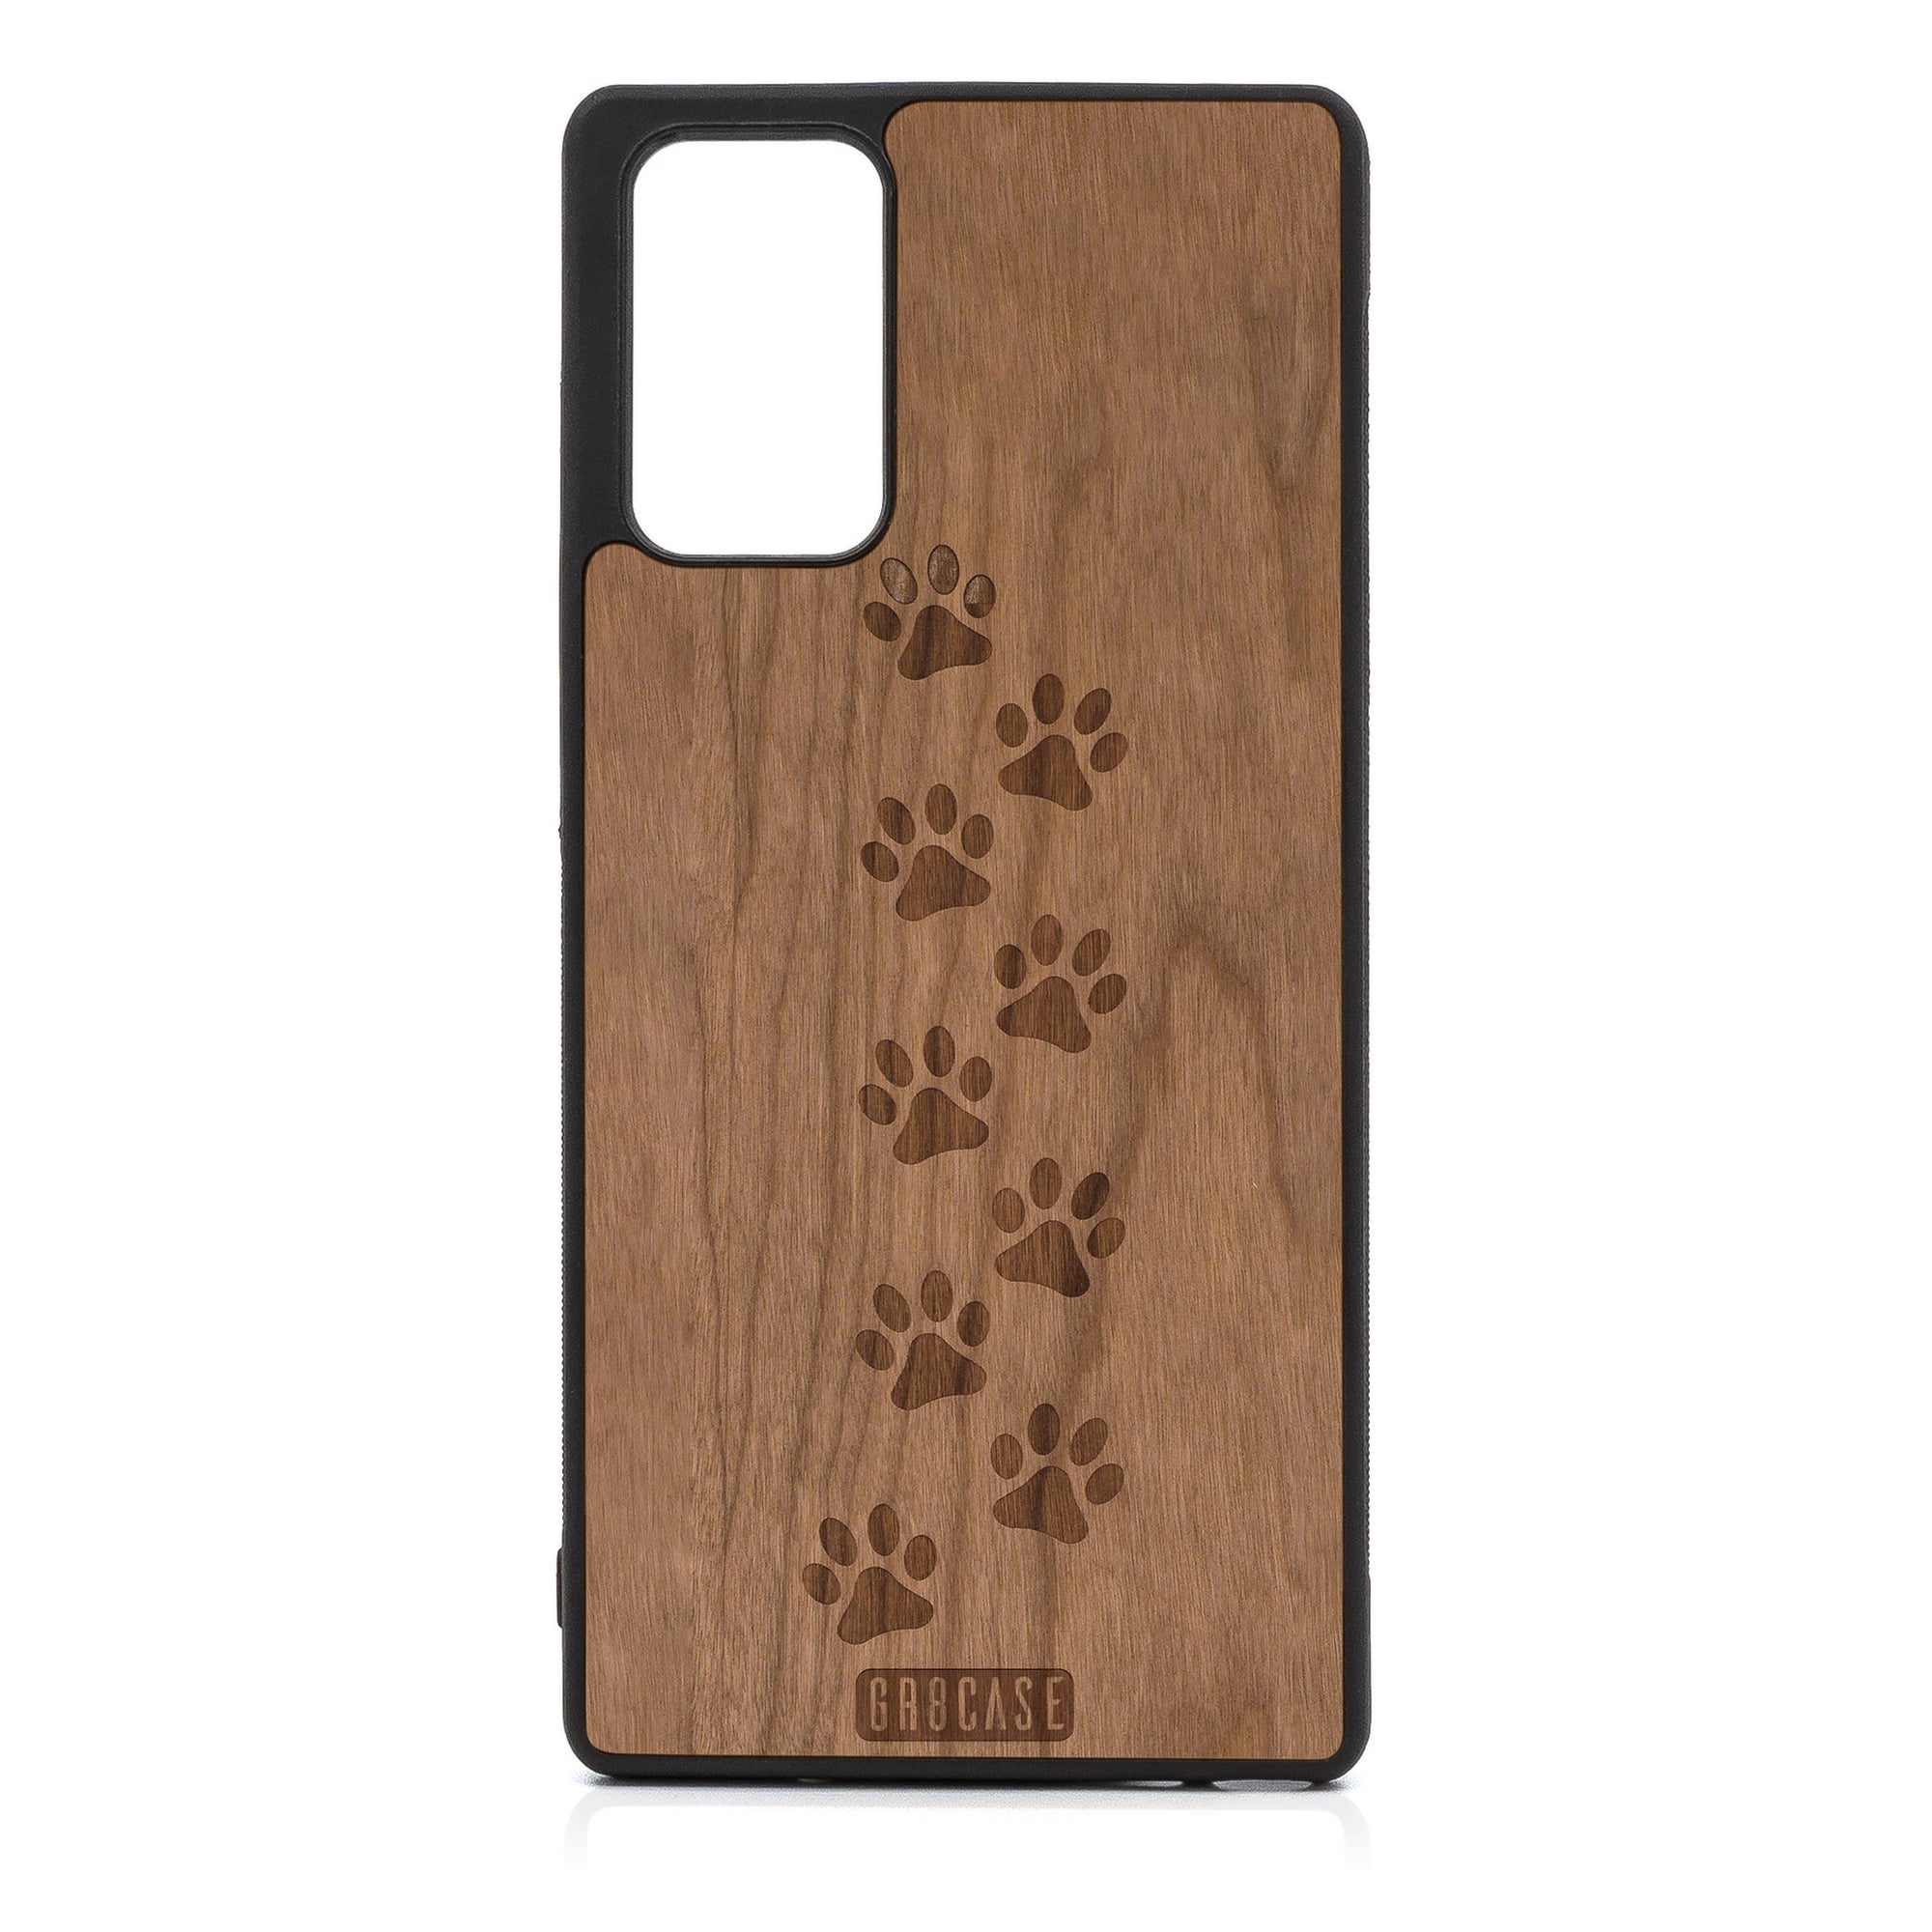 Paw Prints Design Wood Case For Samsung Galaxy Note 20